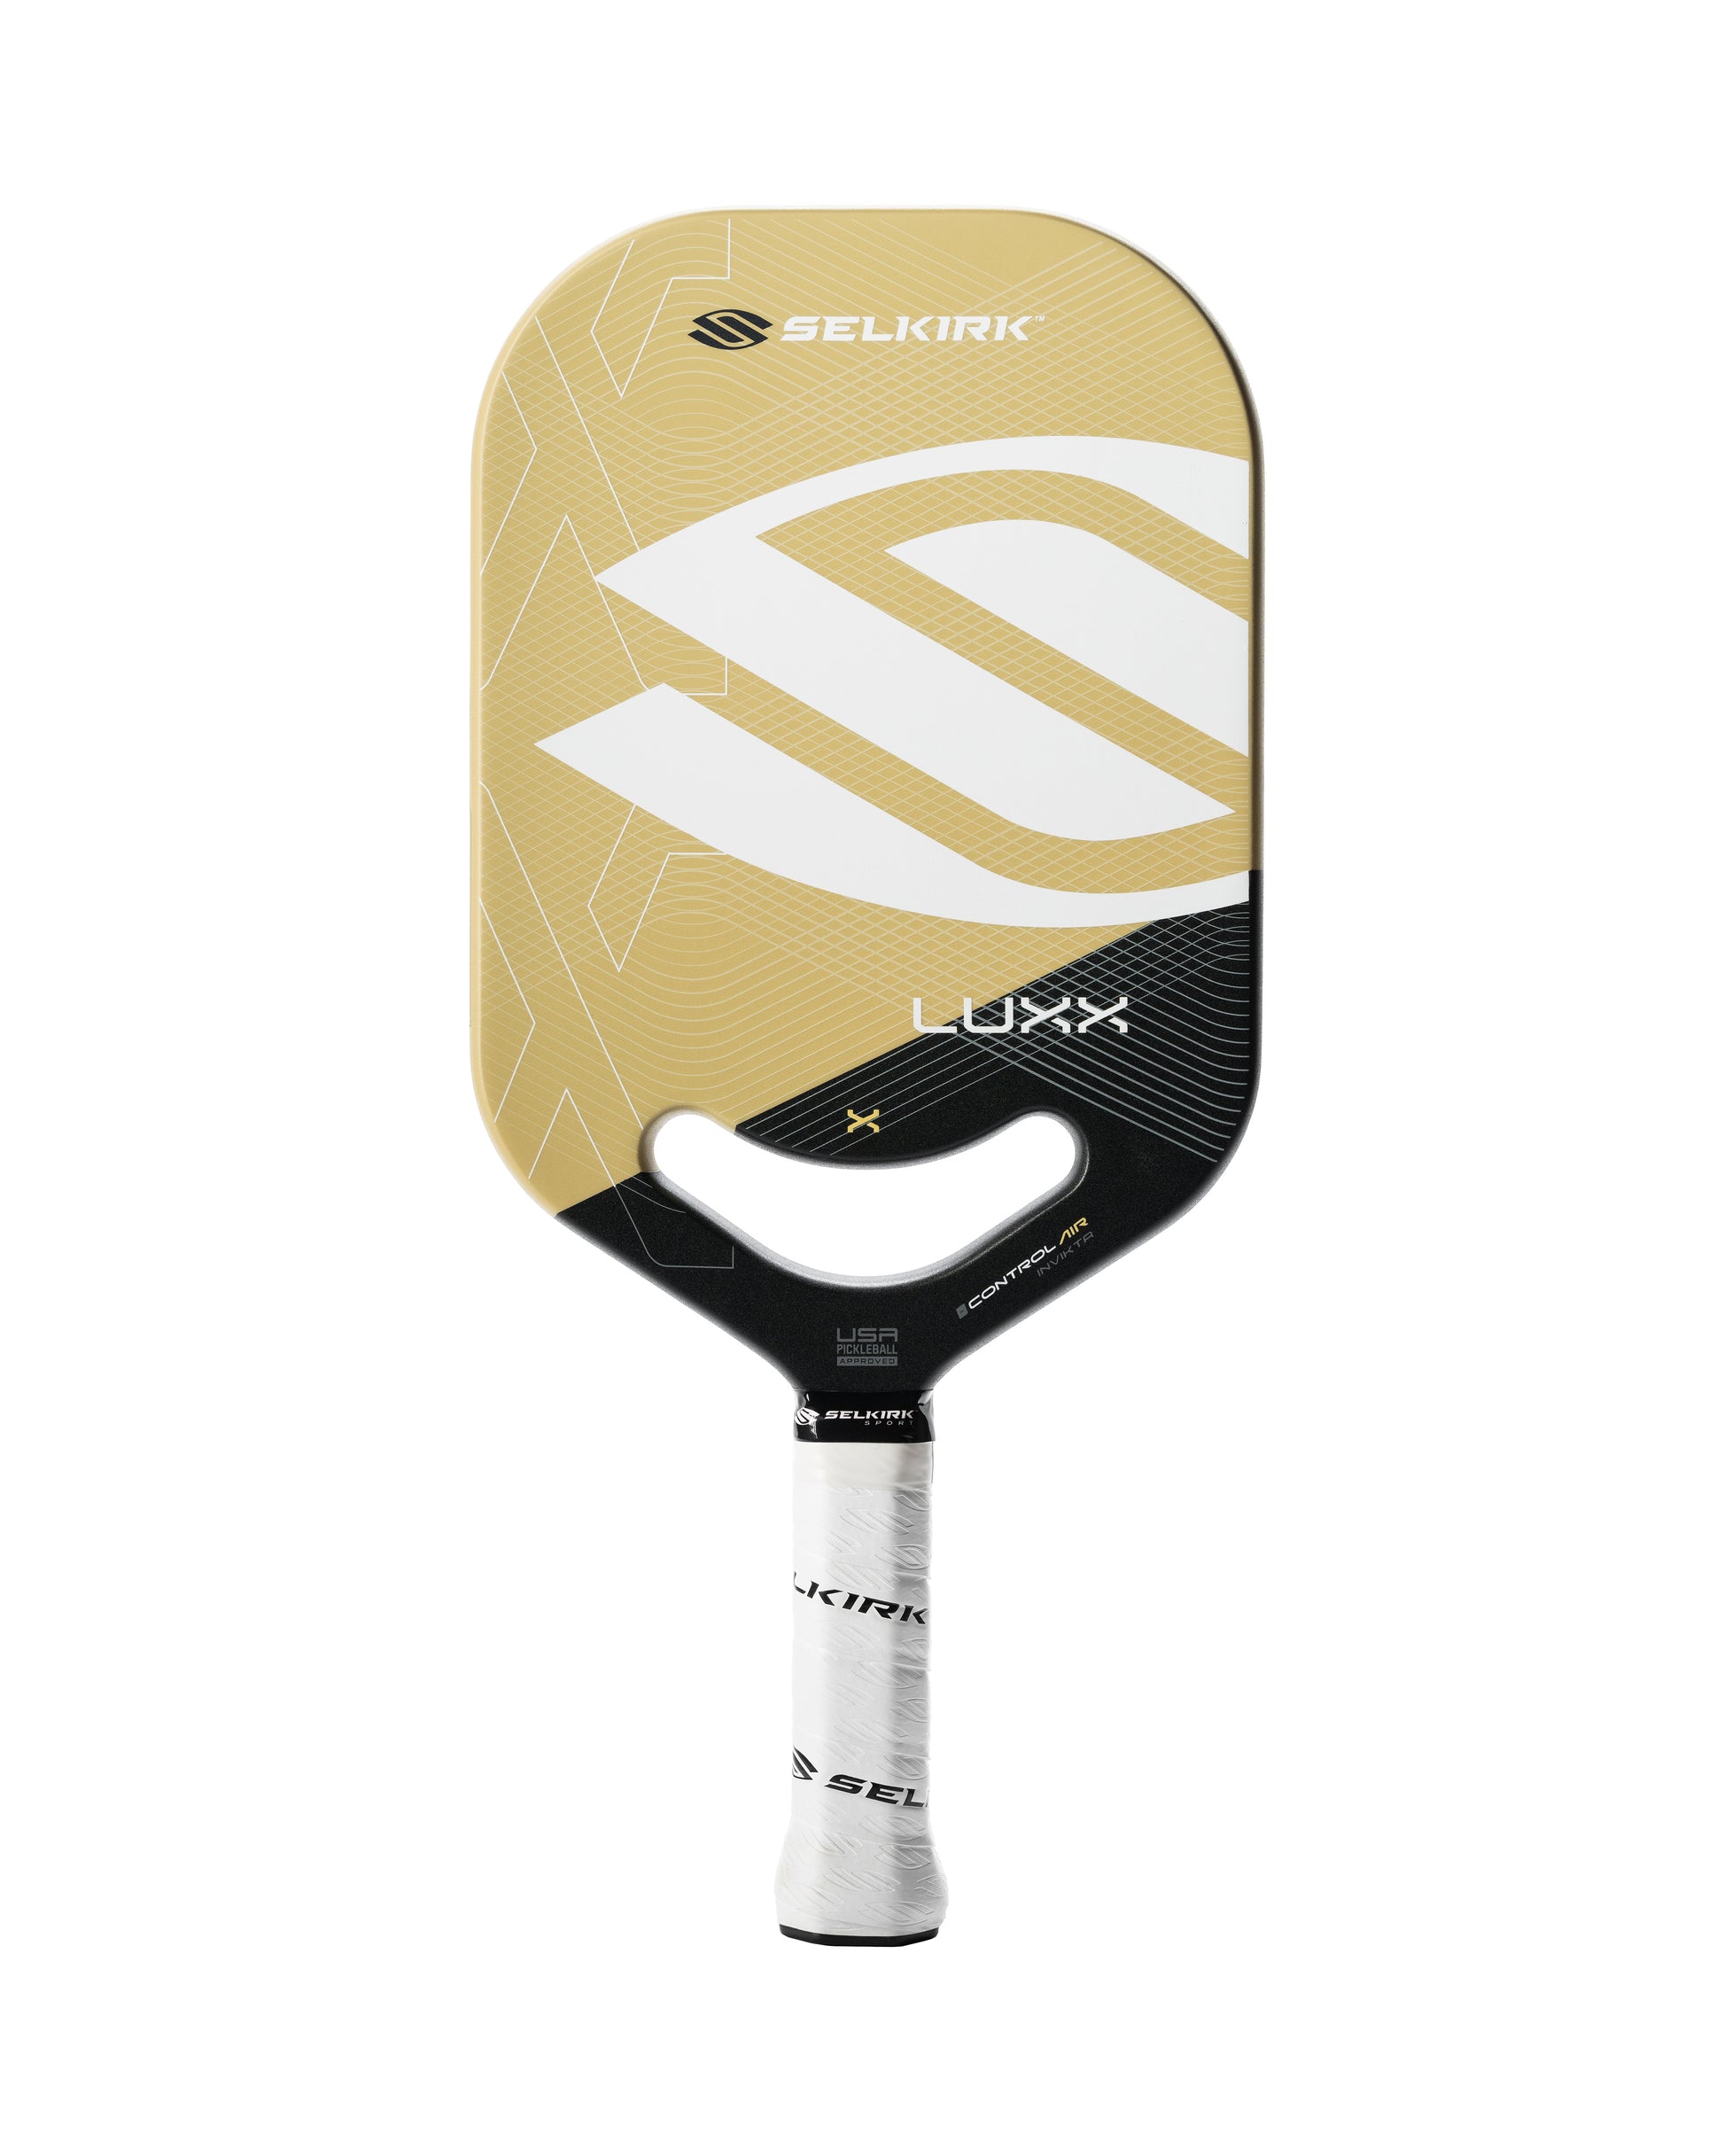 A Selkirk LUXX Control Air Invikta pickleball paddle for Selkirk players on a white background.